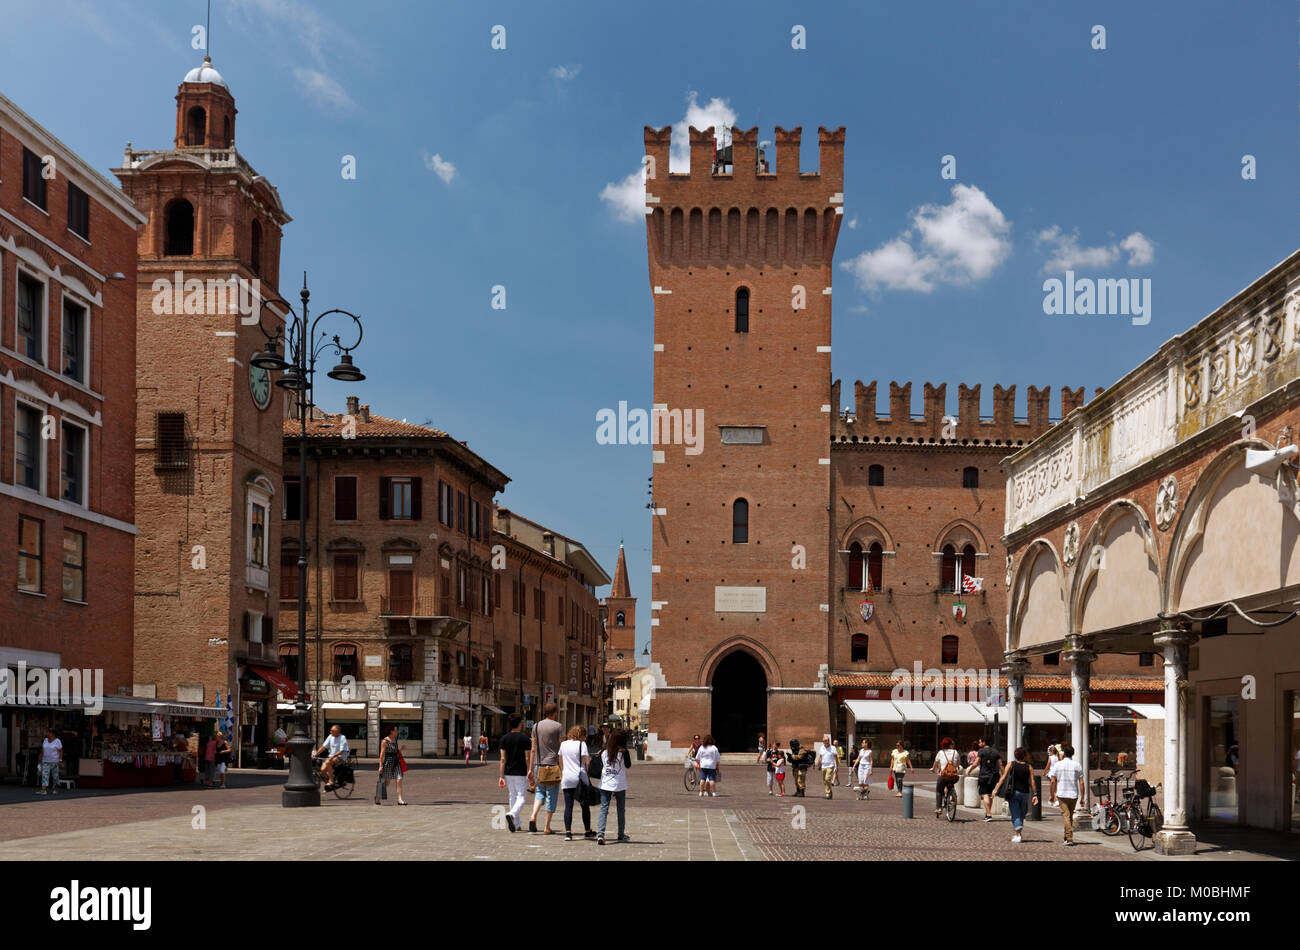 Ferrara, Italy - June 17, 2017: People walking on Piazza Trento against the Ferrara Town Hall. Begun in 1245, the City Hall was the residence of the E Stock Photo